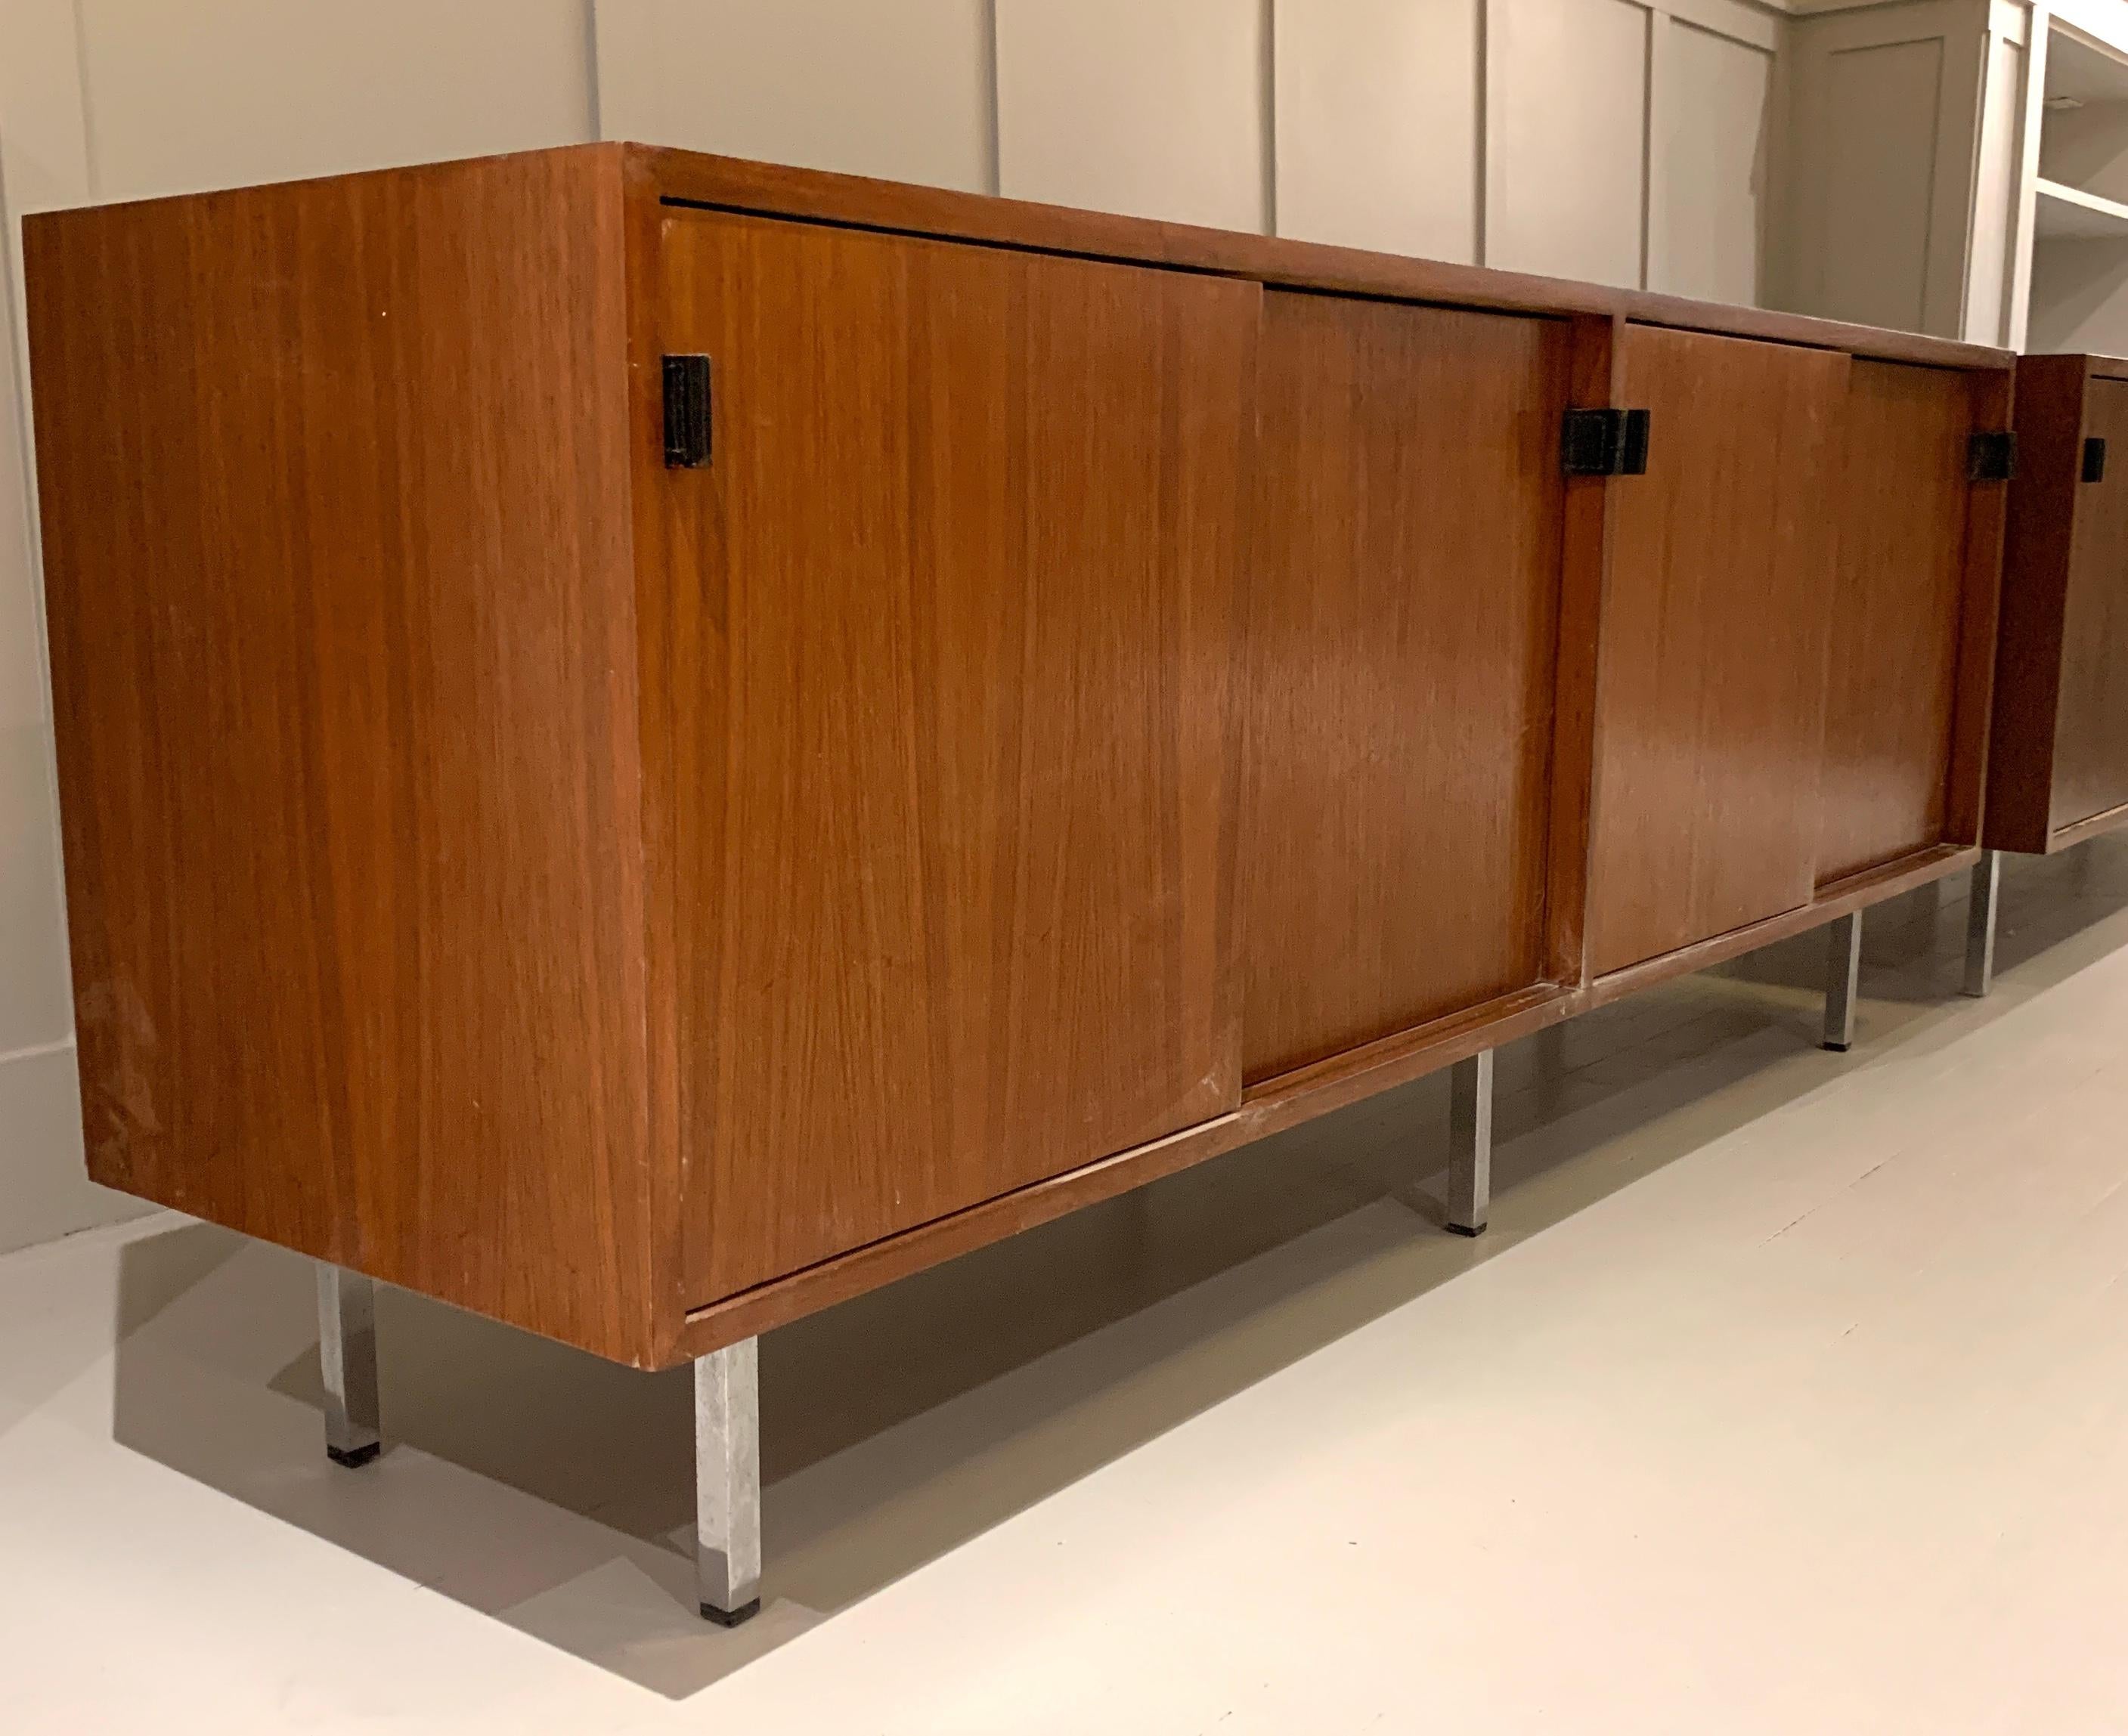 NEW Sale Price!!!  1960s Florence Knoll Credenza. This is an authentic mid-century modern classic discounted to move. 

Early production Credenza with walnut exterior and oak interior designed by Florence Knoll for Knoll & Associates. Refined,